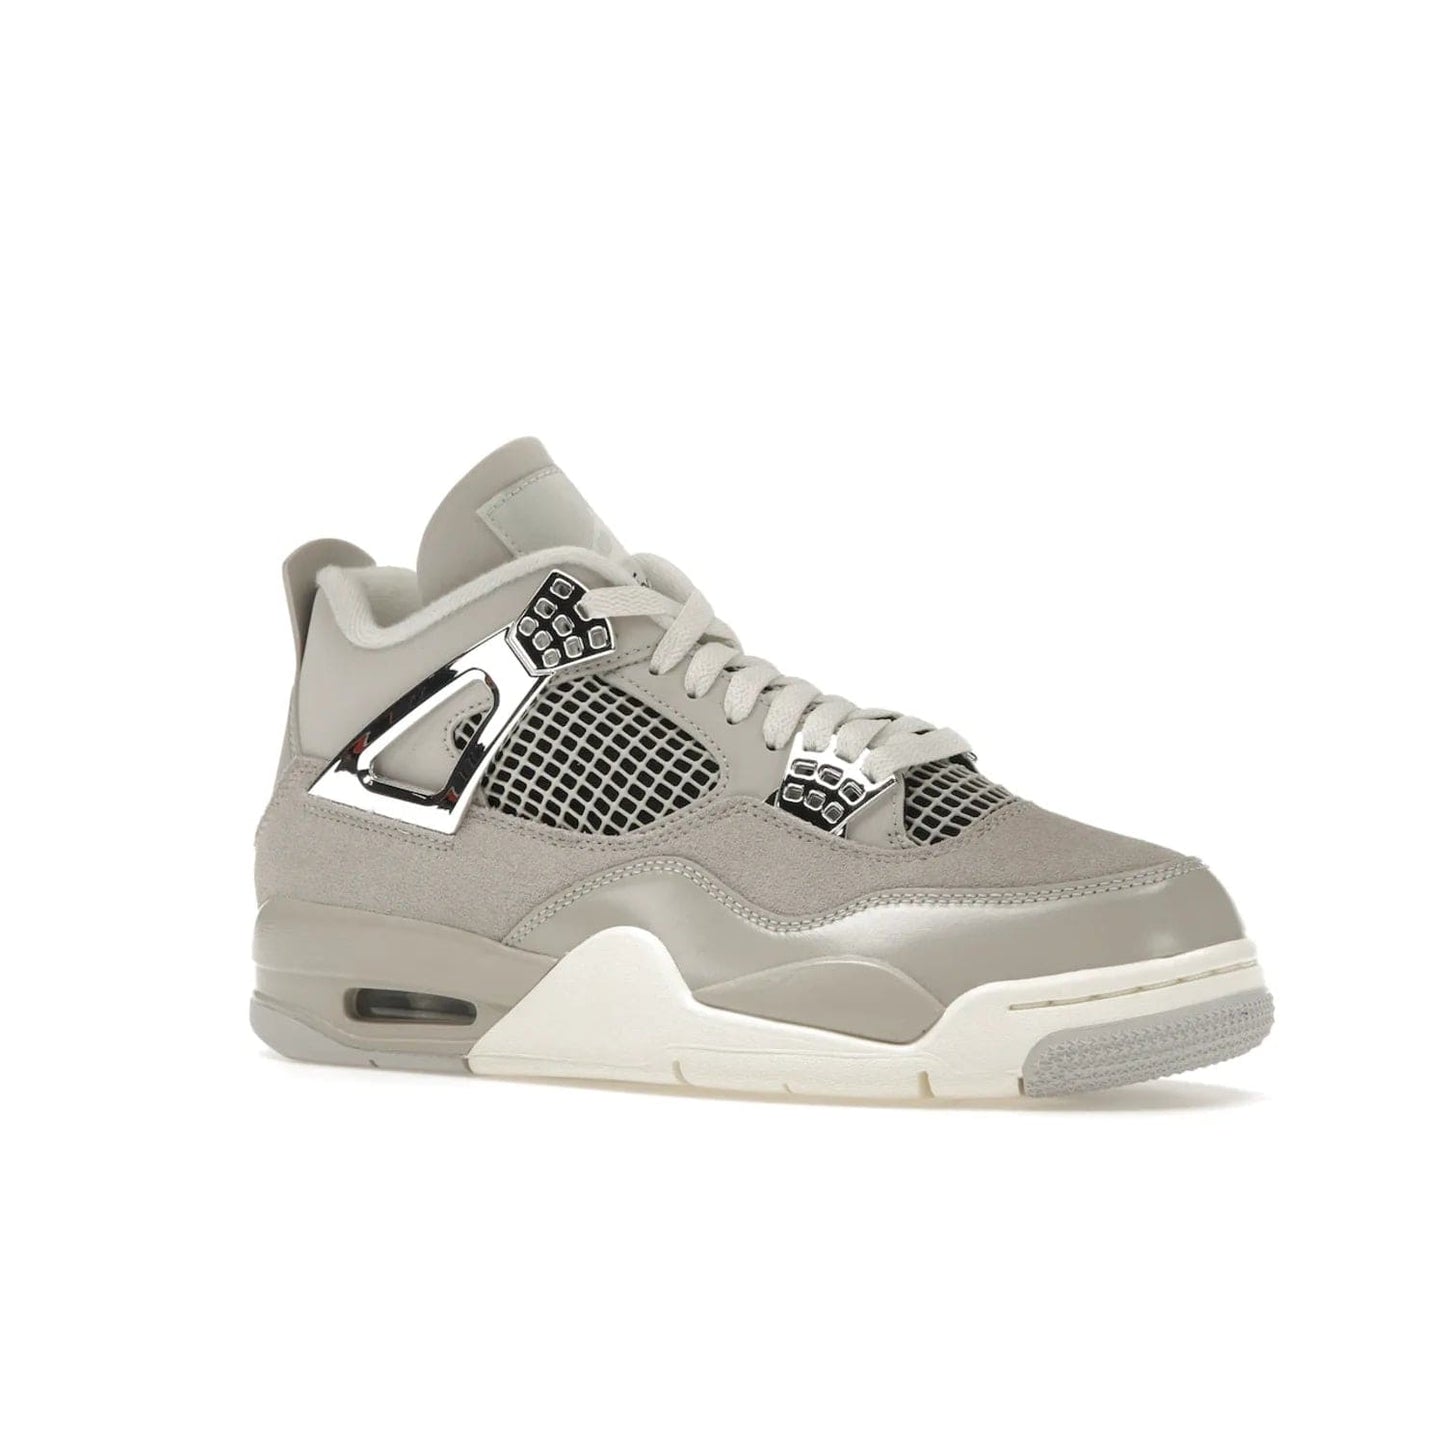 Jordan 4 Retro Frozen Moments (Women's) - Image 4 - Only at www.BallersClubKickz.com - The Jordan 4 Retro Frozen Moments is a stylish blend of classic design elements and modern tones. Featuring suede and leather overlays in a light iron-ore, sail, neutral grey, black, and metallic silver colorway. Get this iconic high-performance sneaker for $210.